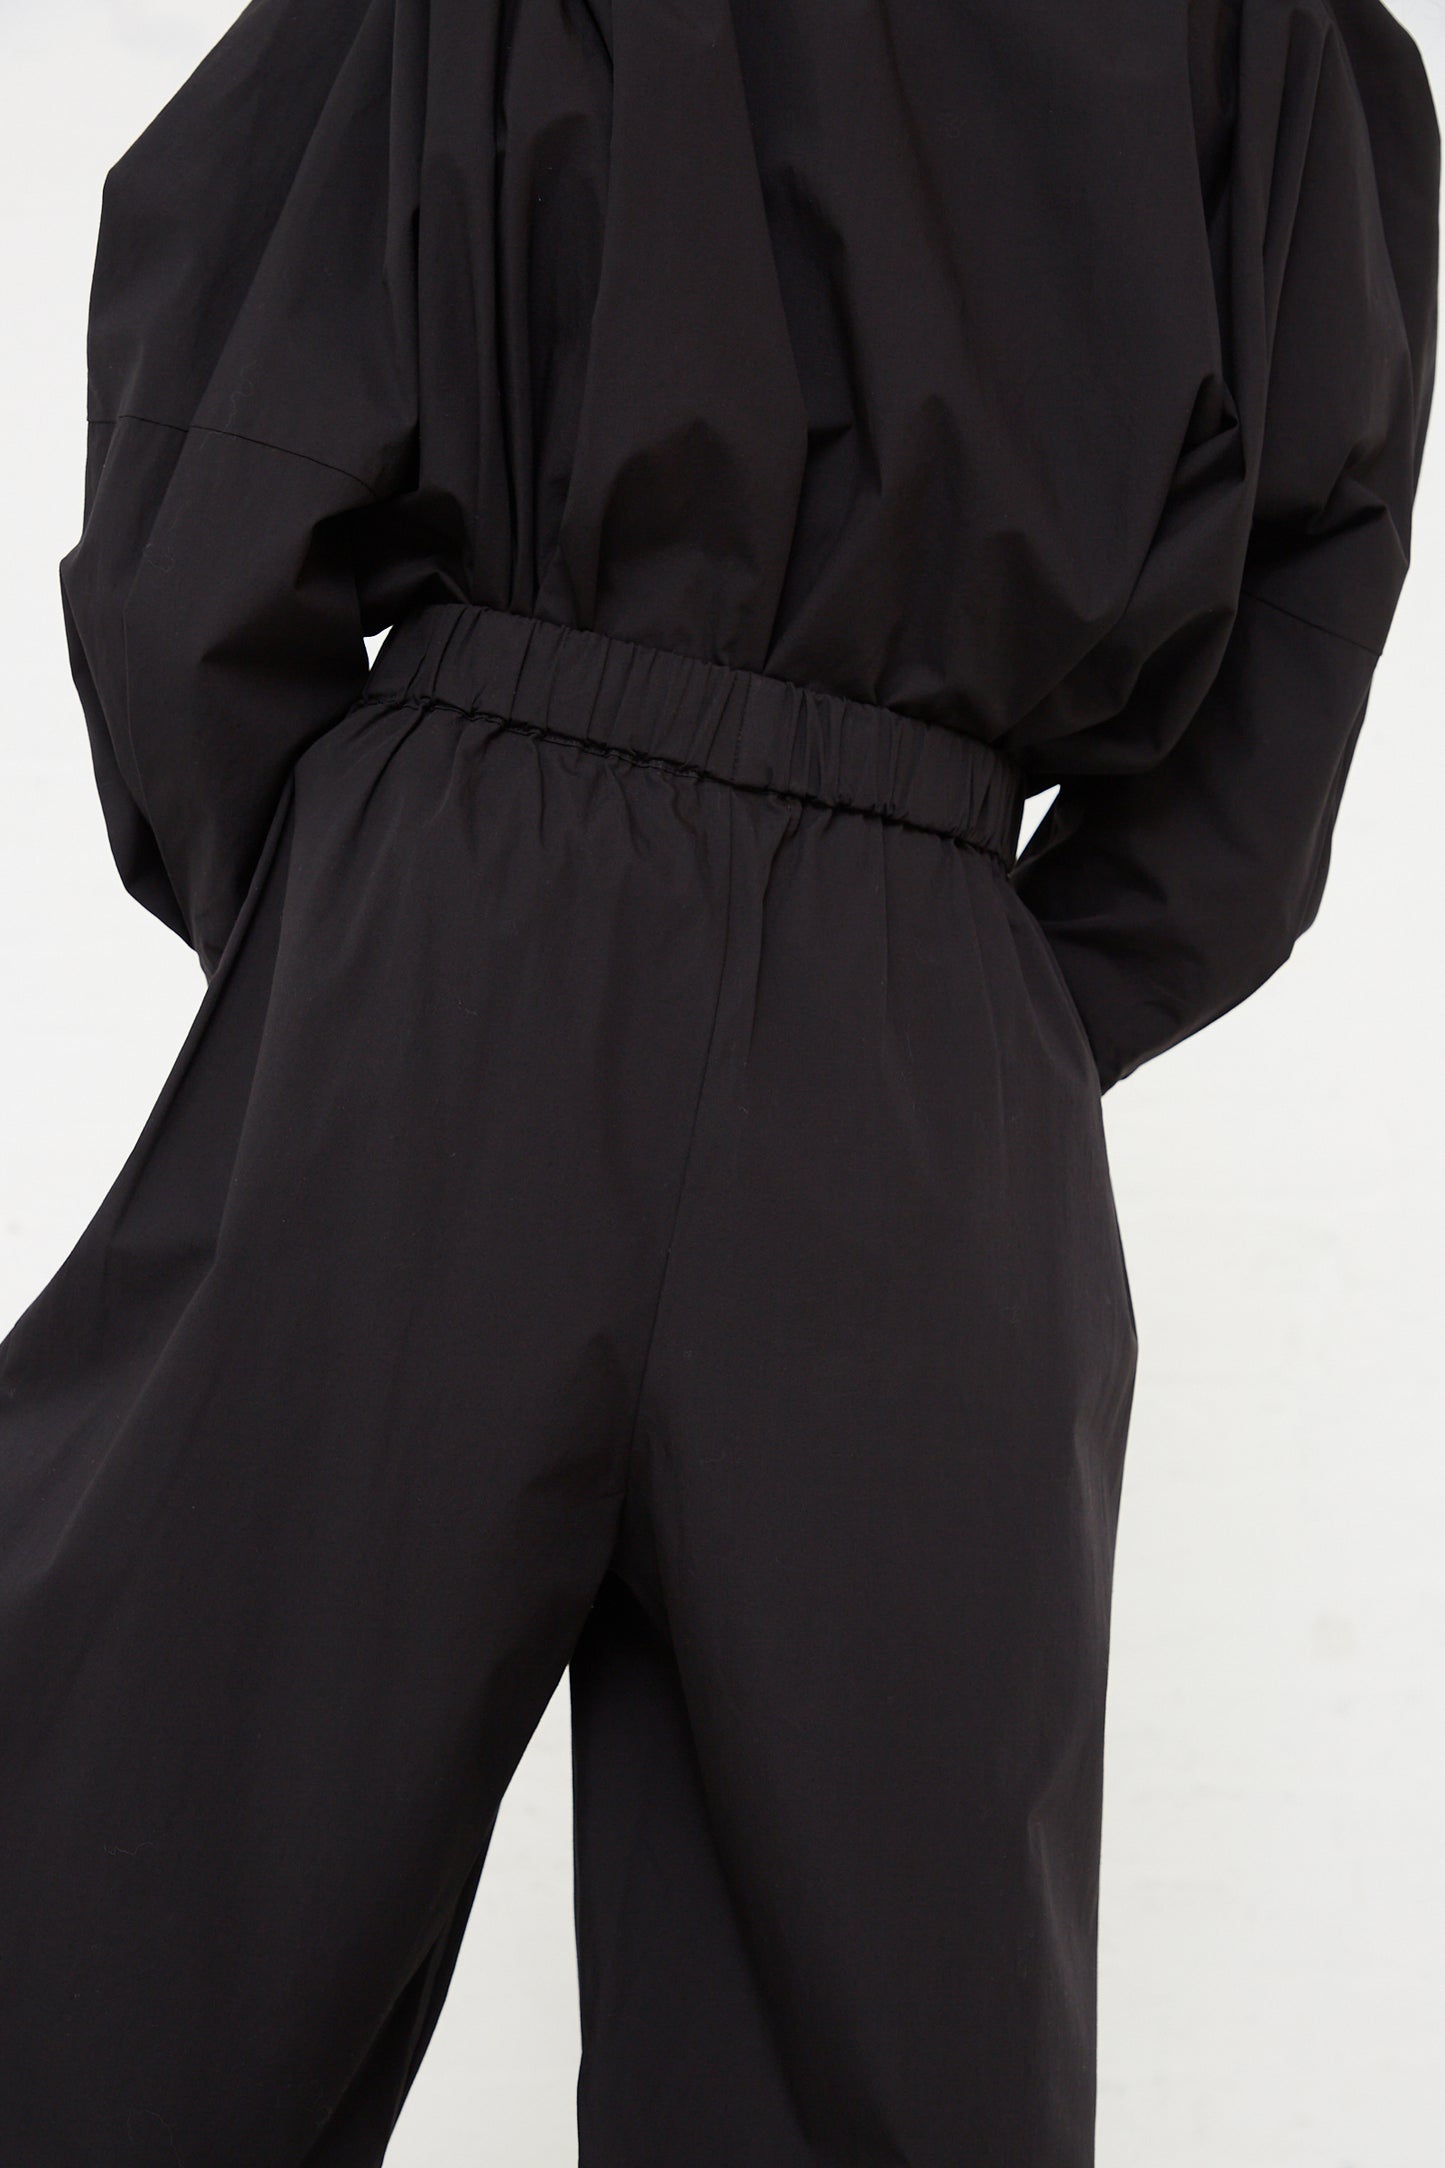 Woman wearing a Black Crane Organic Cotton Straight Draped Pant in Black, featuring a cinched waist.